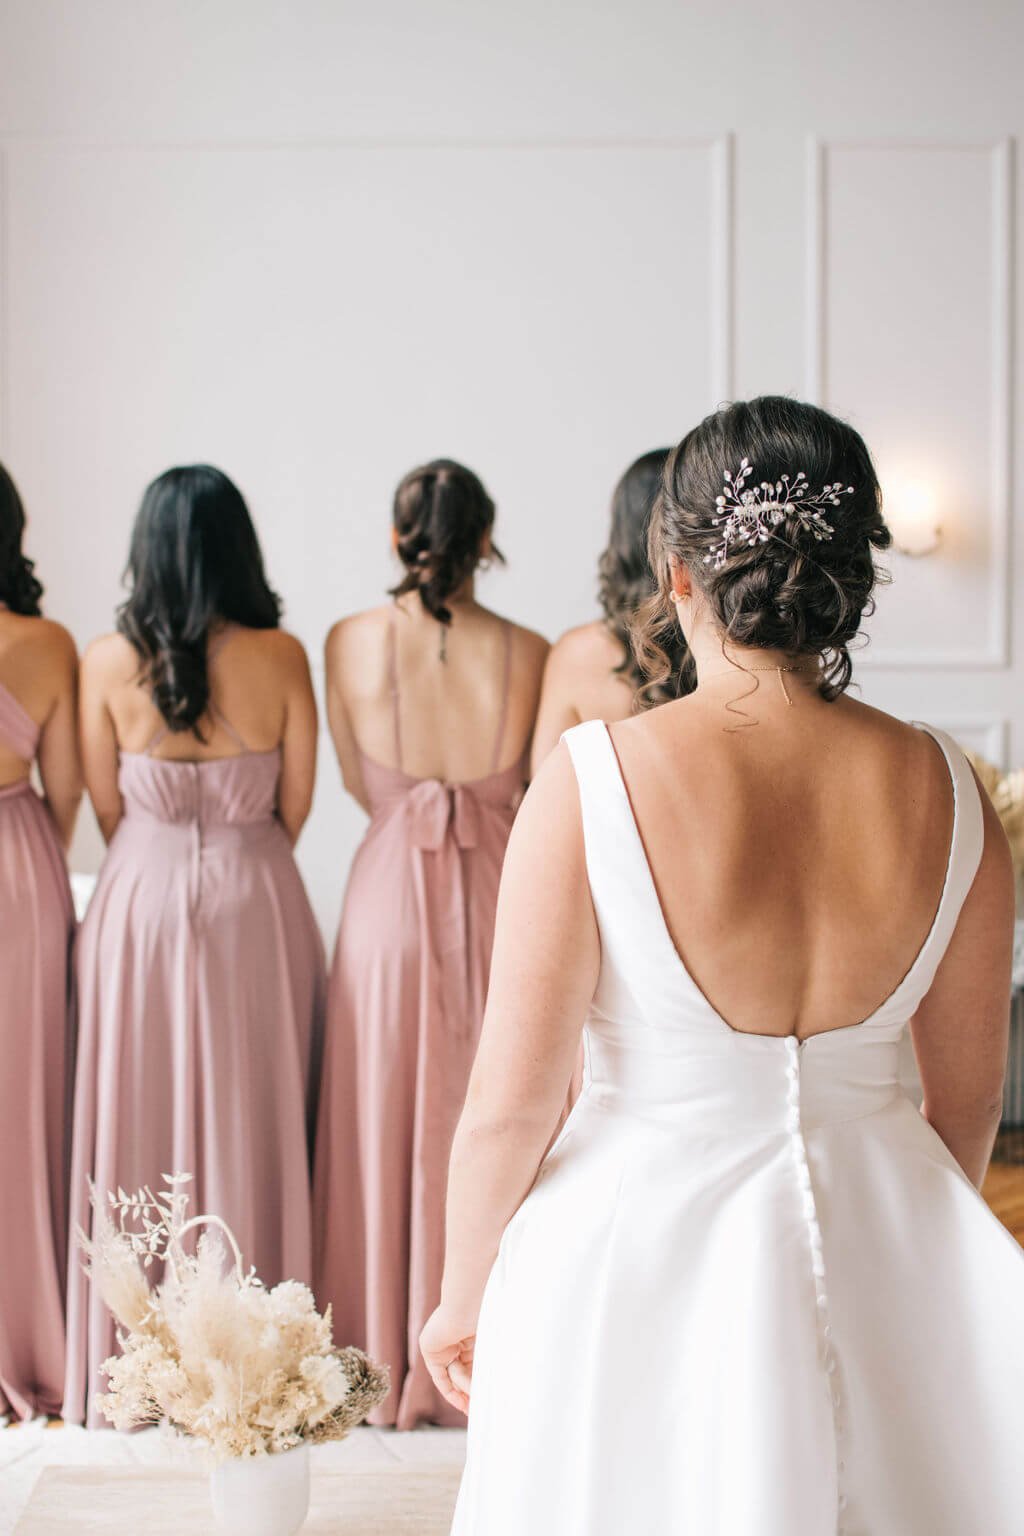 Toronto bride and her bridesmaids share first look photographed by Toronto wedding photographers, Ugo Photography